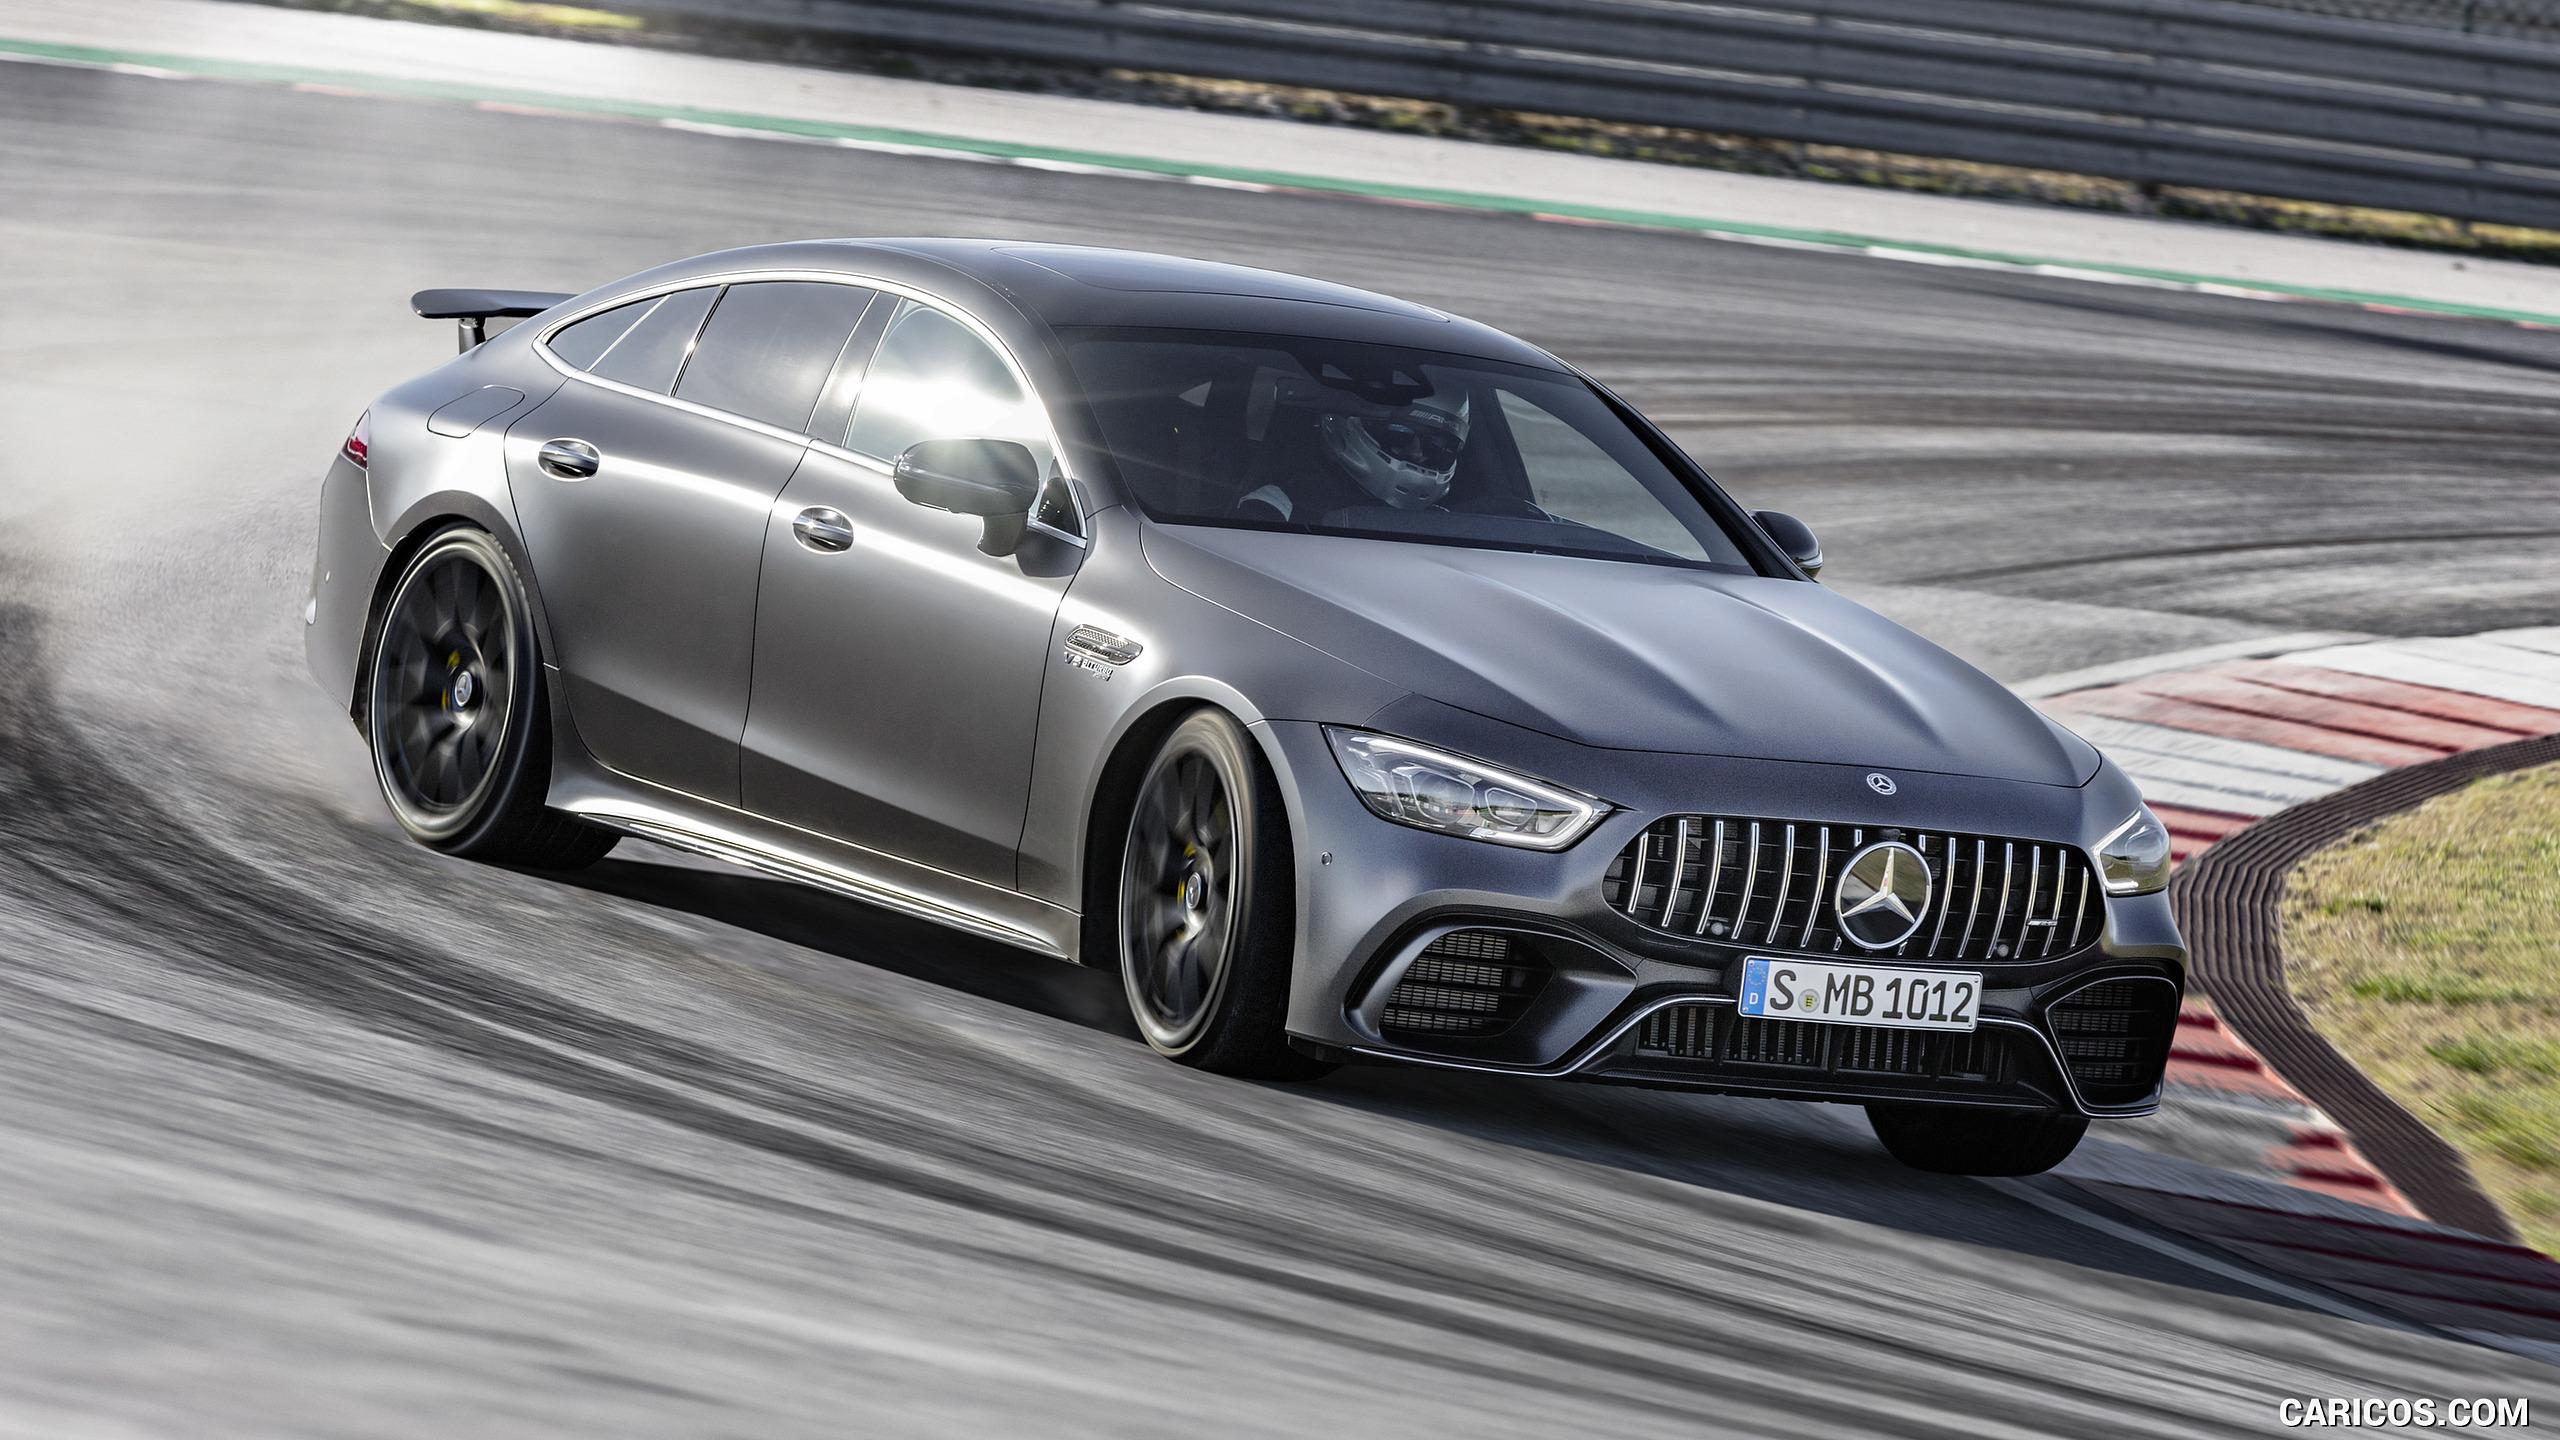 Mercedes AMG GT 63 S 4MATIC+ 4 Door Coupe Color: Graphite